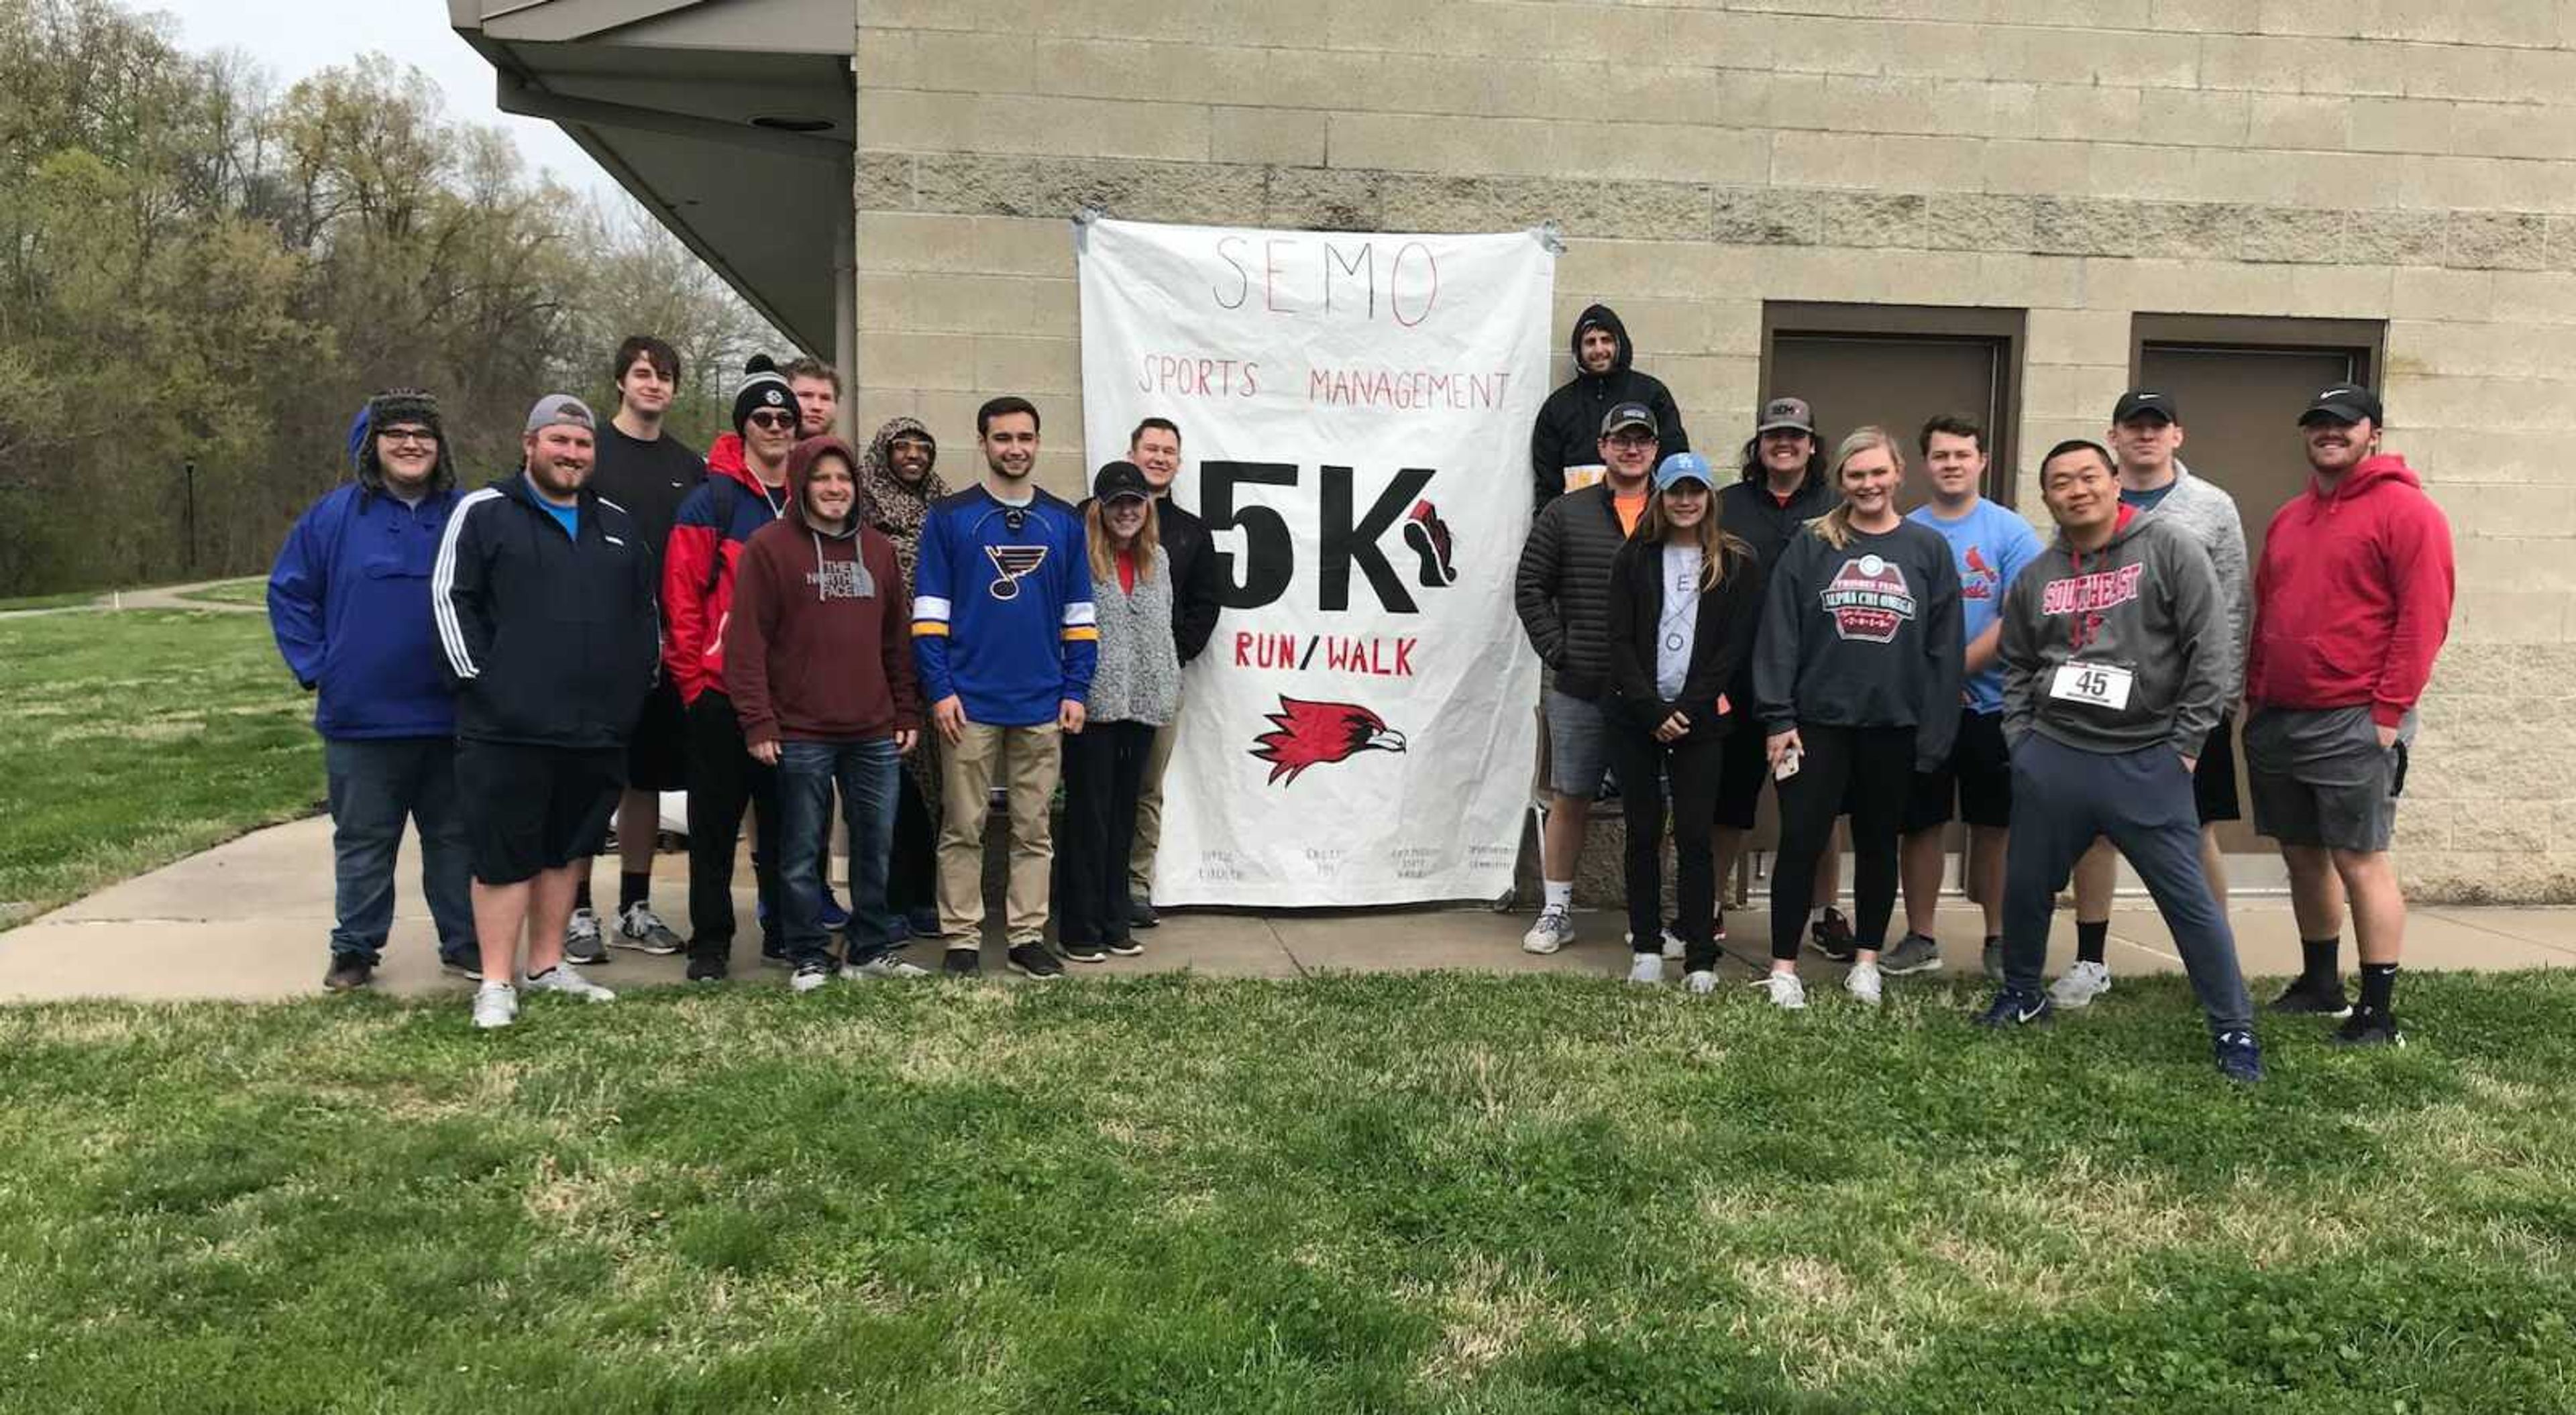 The Sports Event Management class hosts the annual Sports Management 5K run/walk on Saturday, April 13, at the intramural fields.